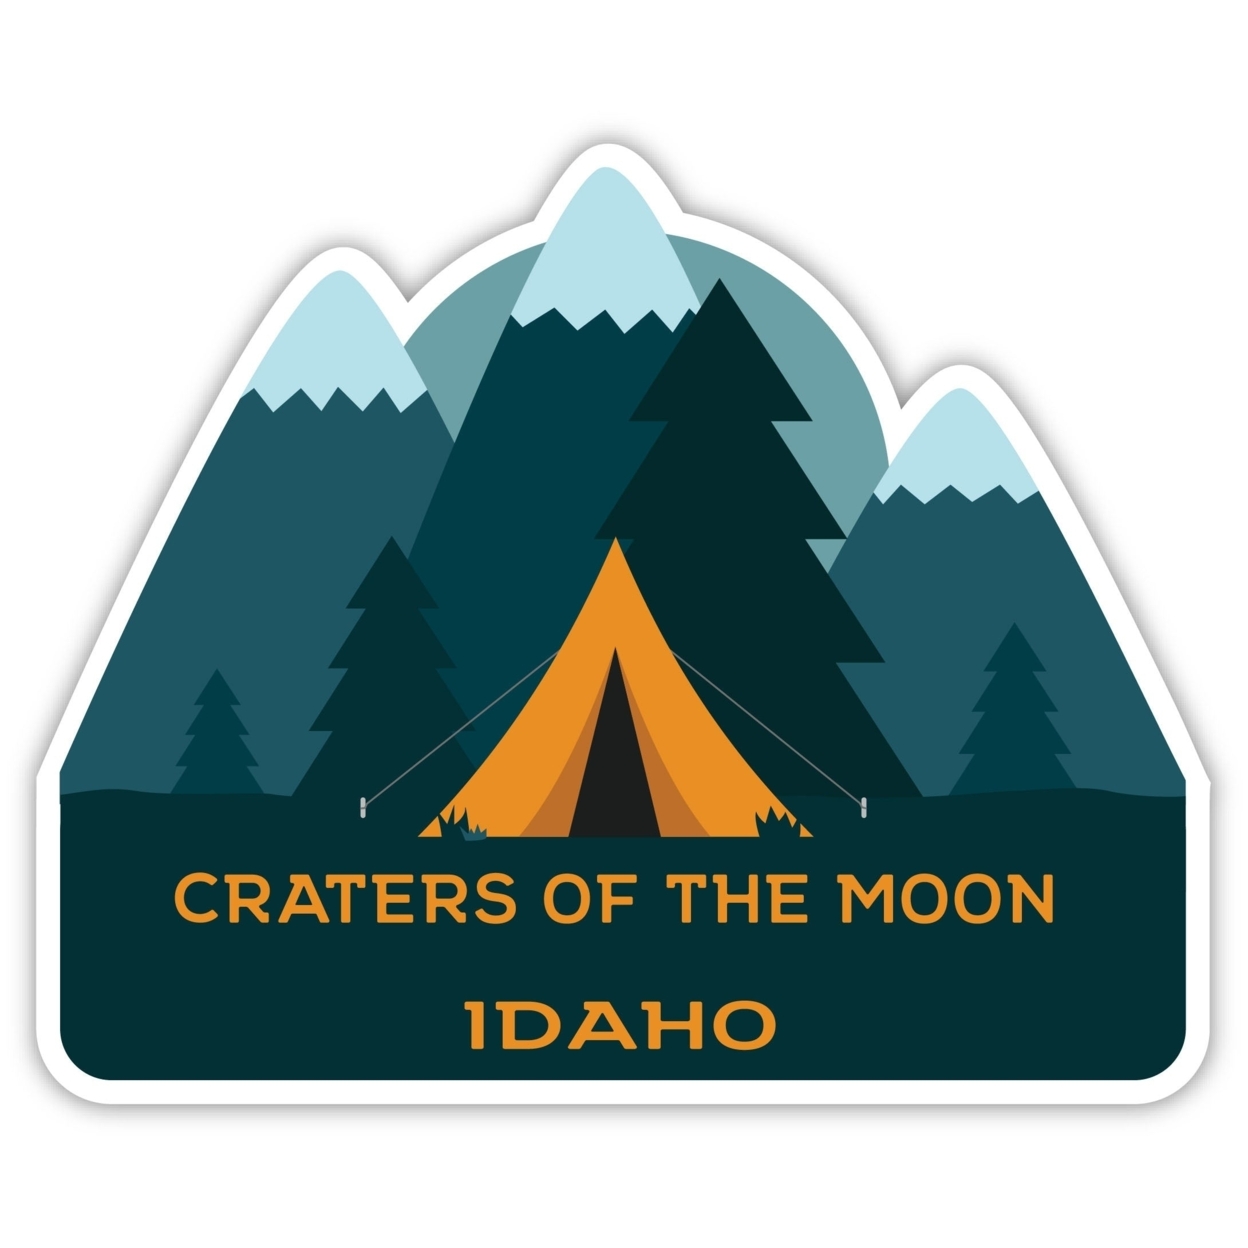 Craters Of The Moon Idaho Souvenir Decorative Stickers (Choose Theme And Size) - 4-Pack, 12-Inch, Tent